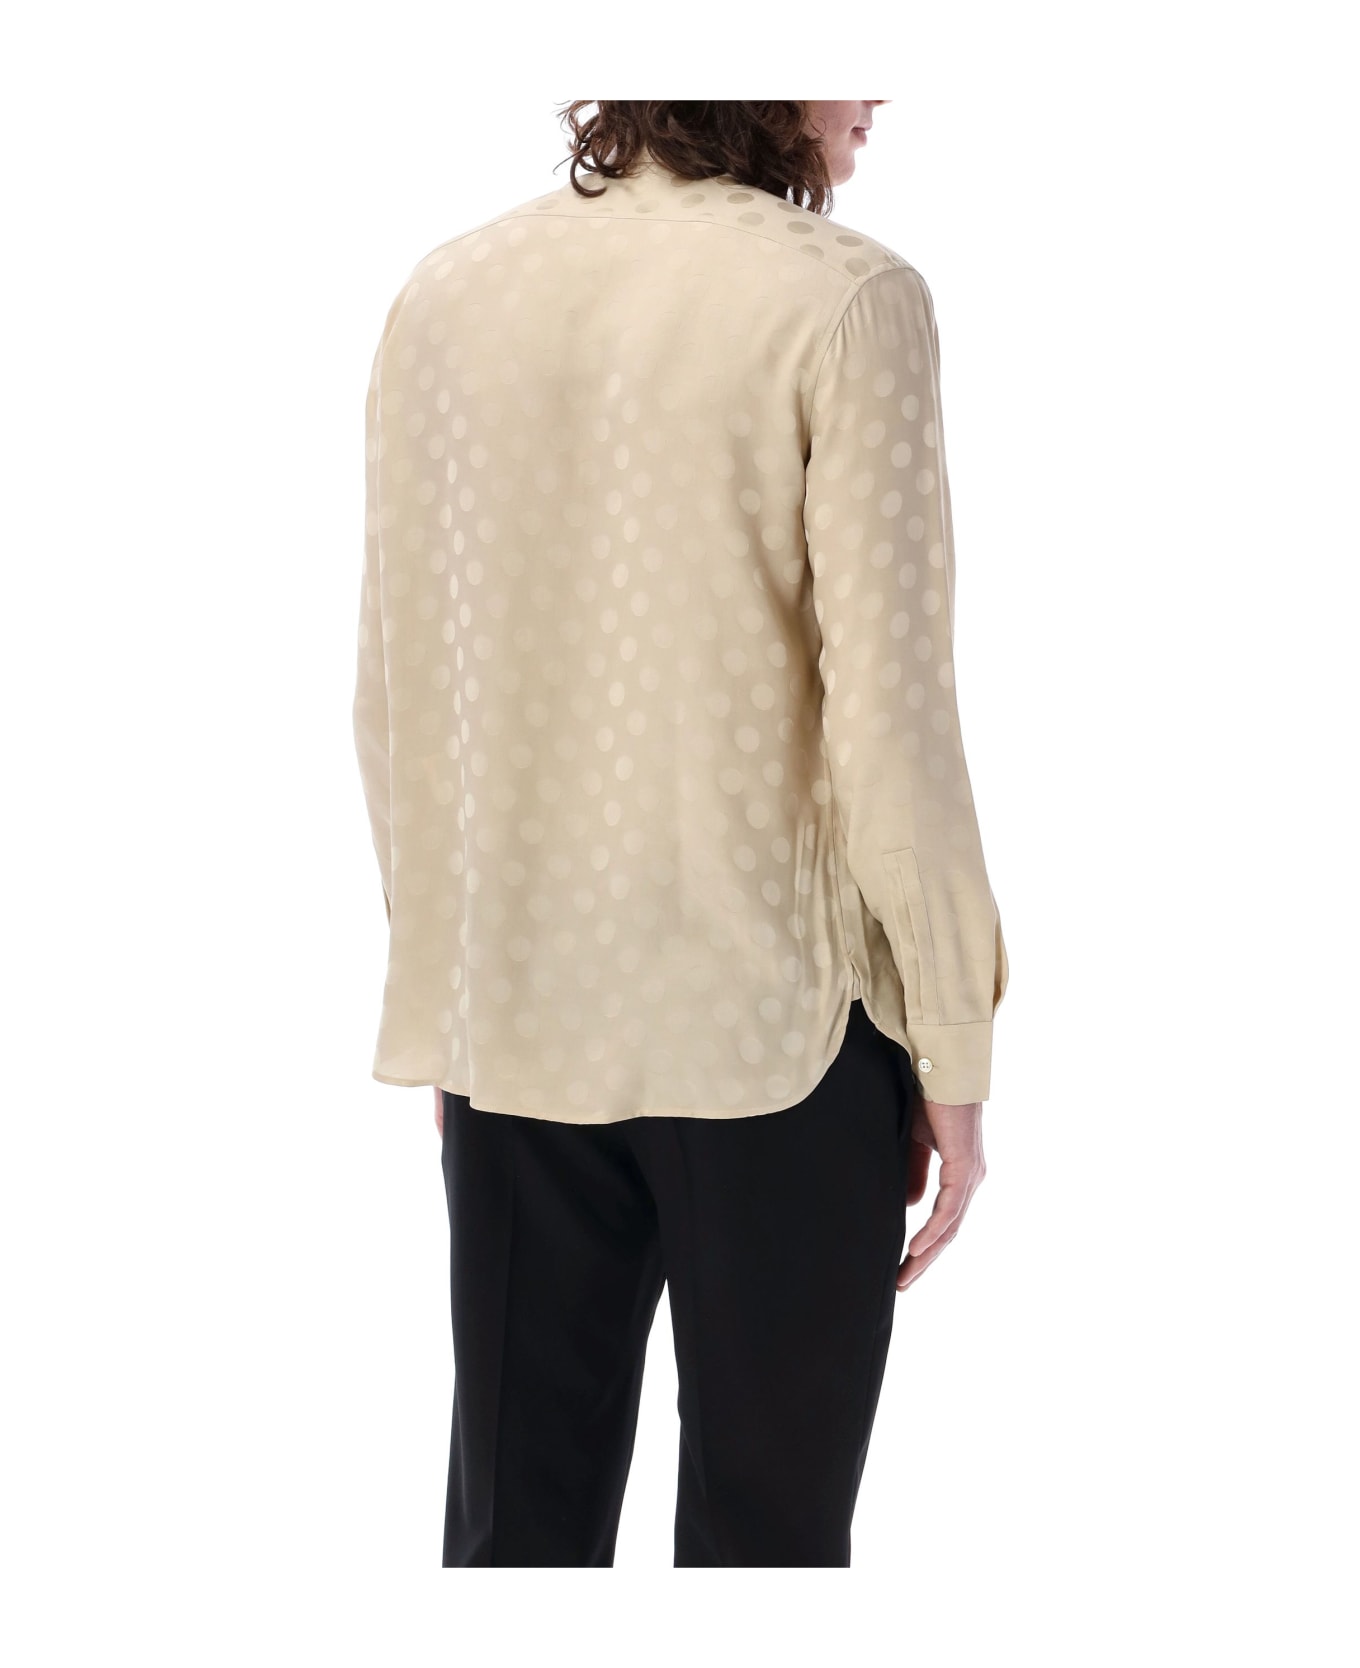 Saint Laurent Shirt In Dotted Shiny And Matte Silk - CREMA